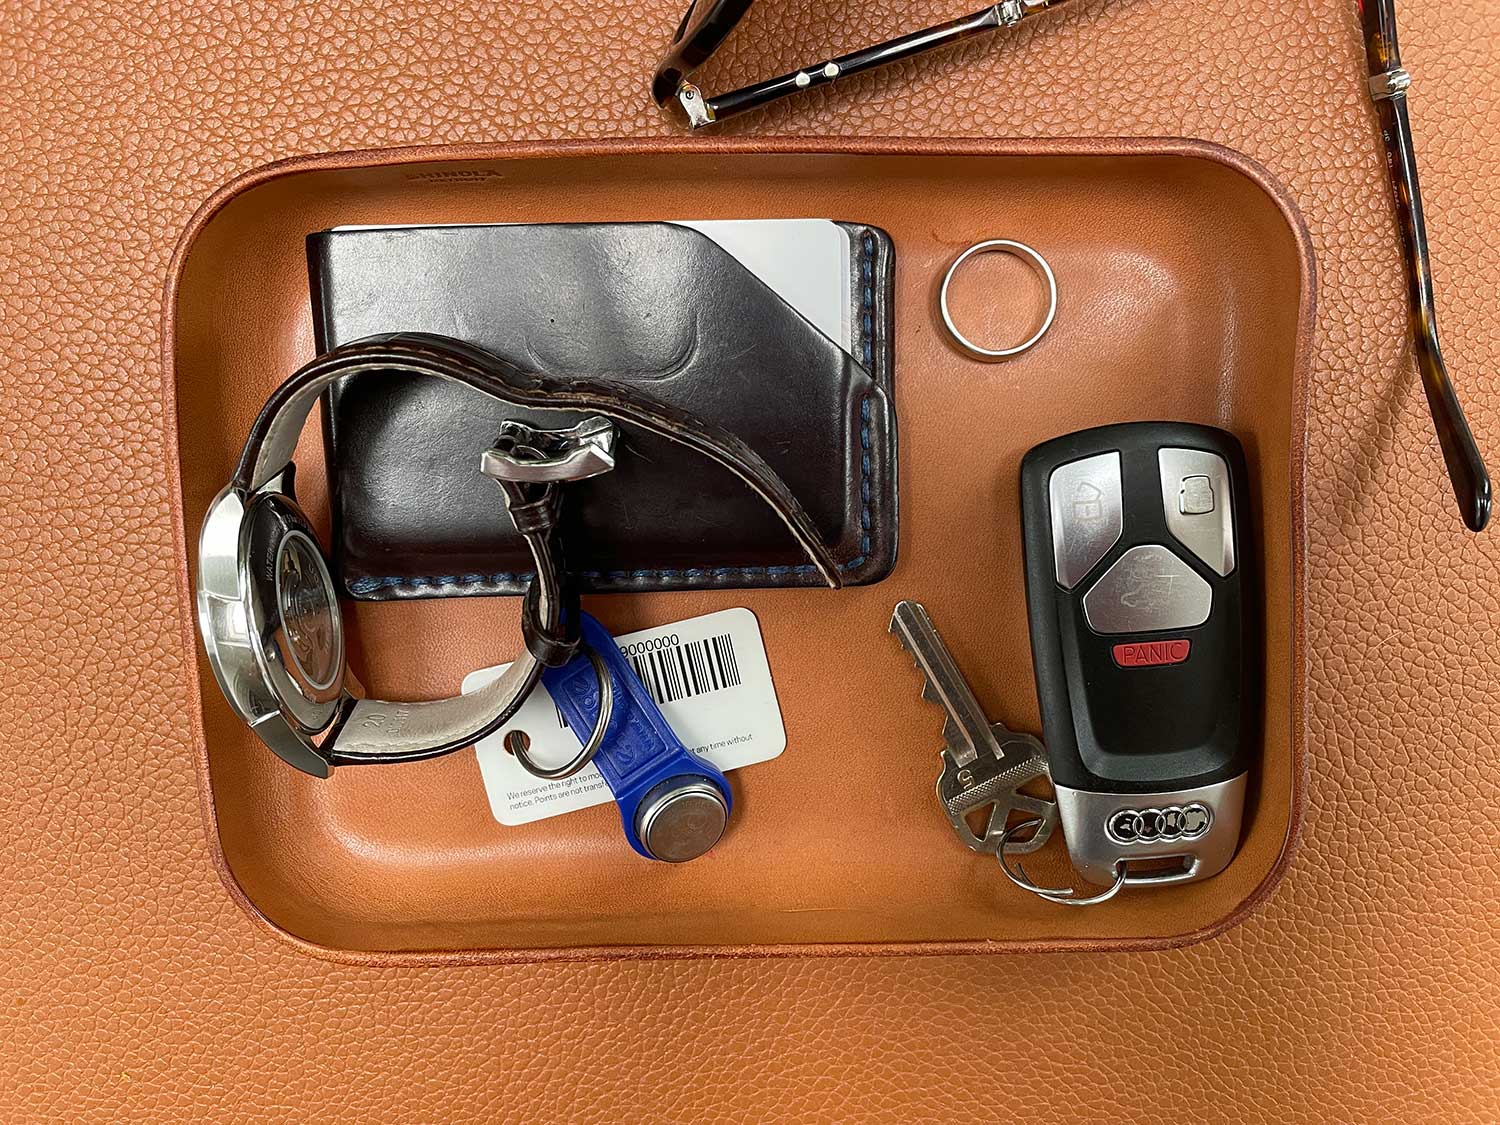 A leather catch-all helps keep EDC organized.